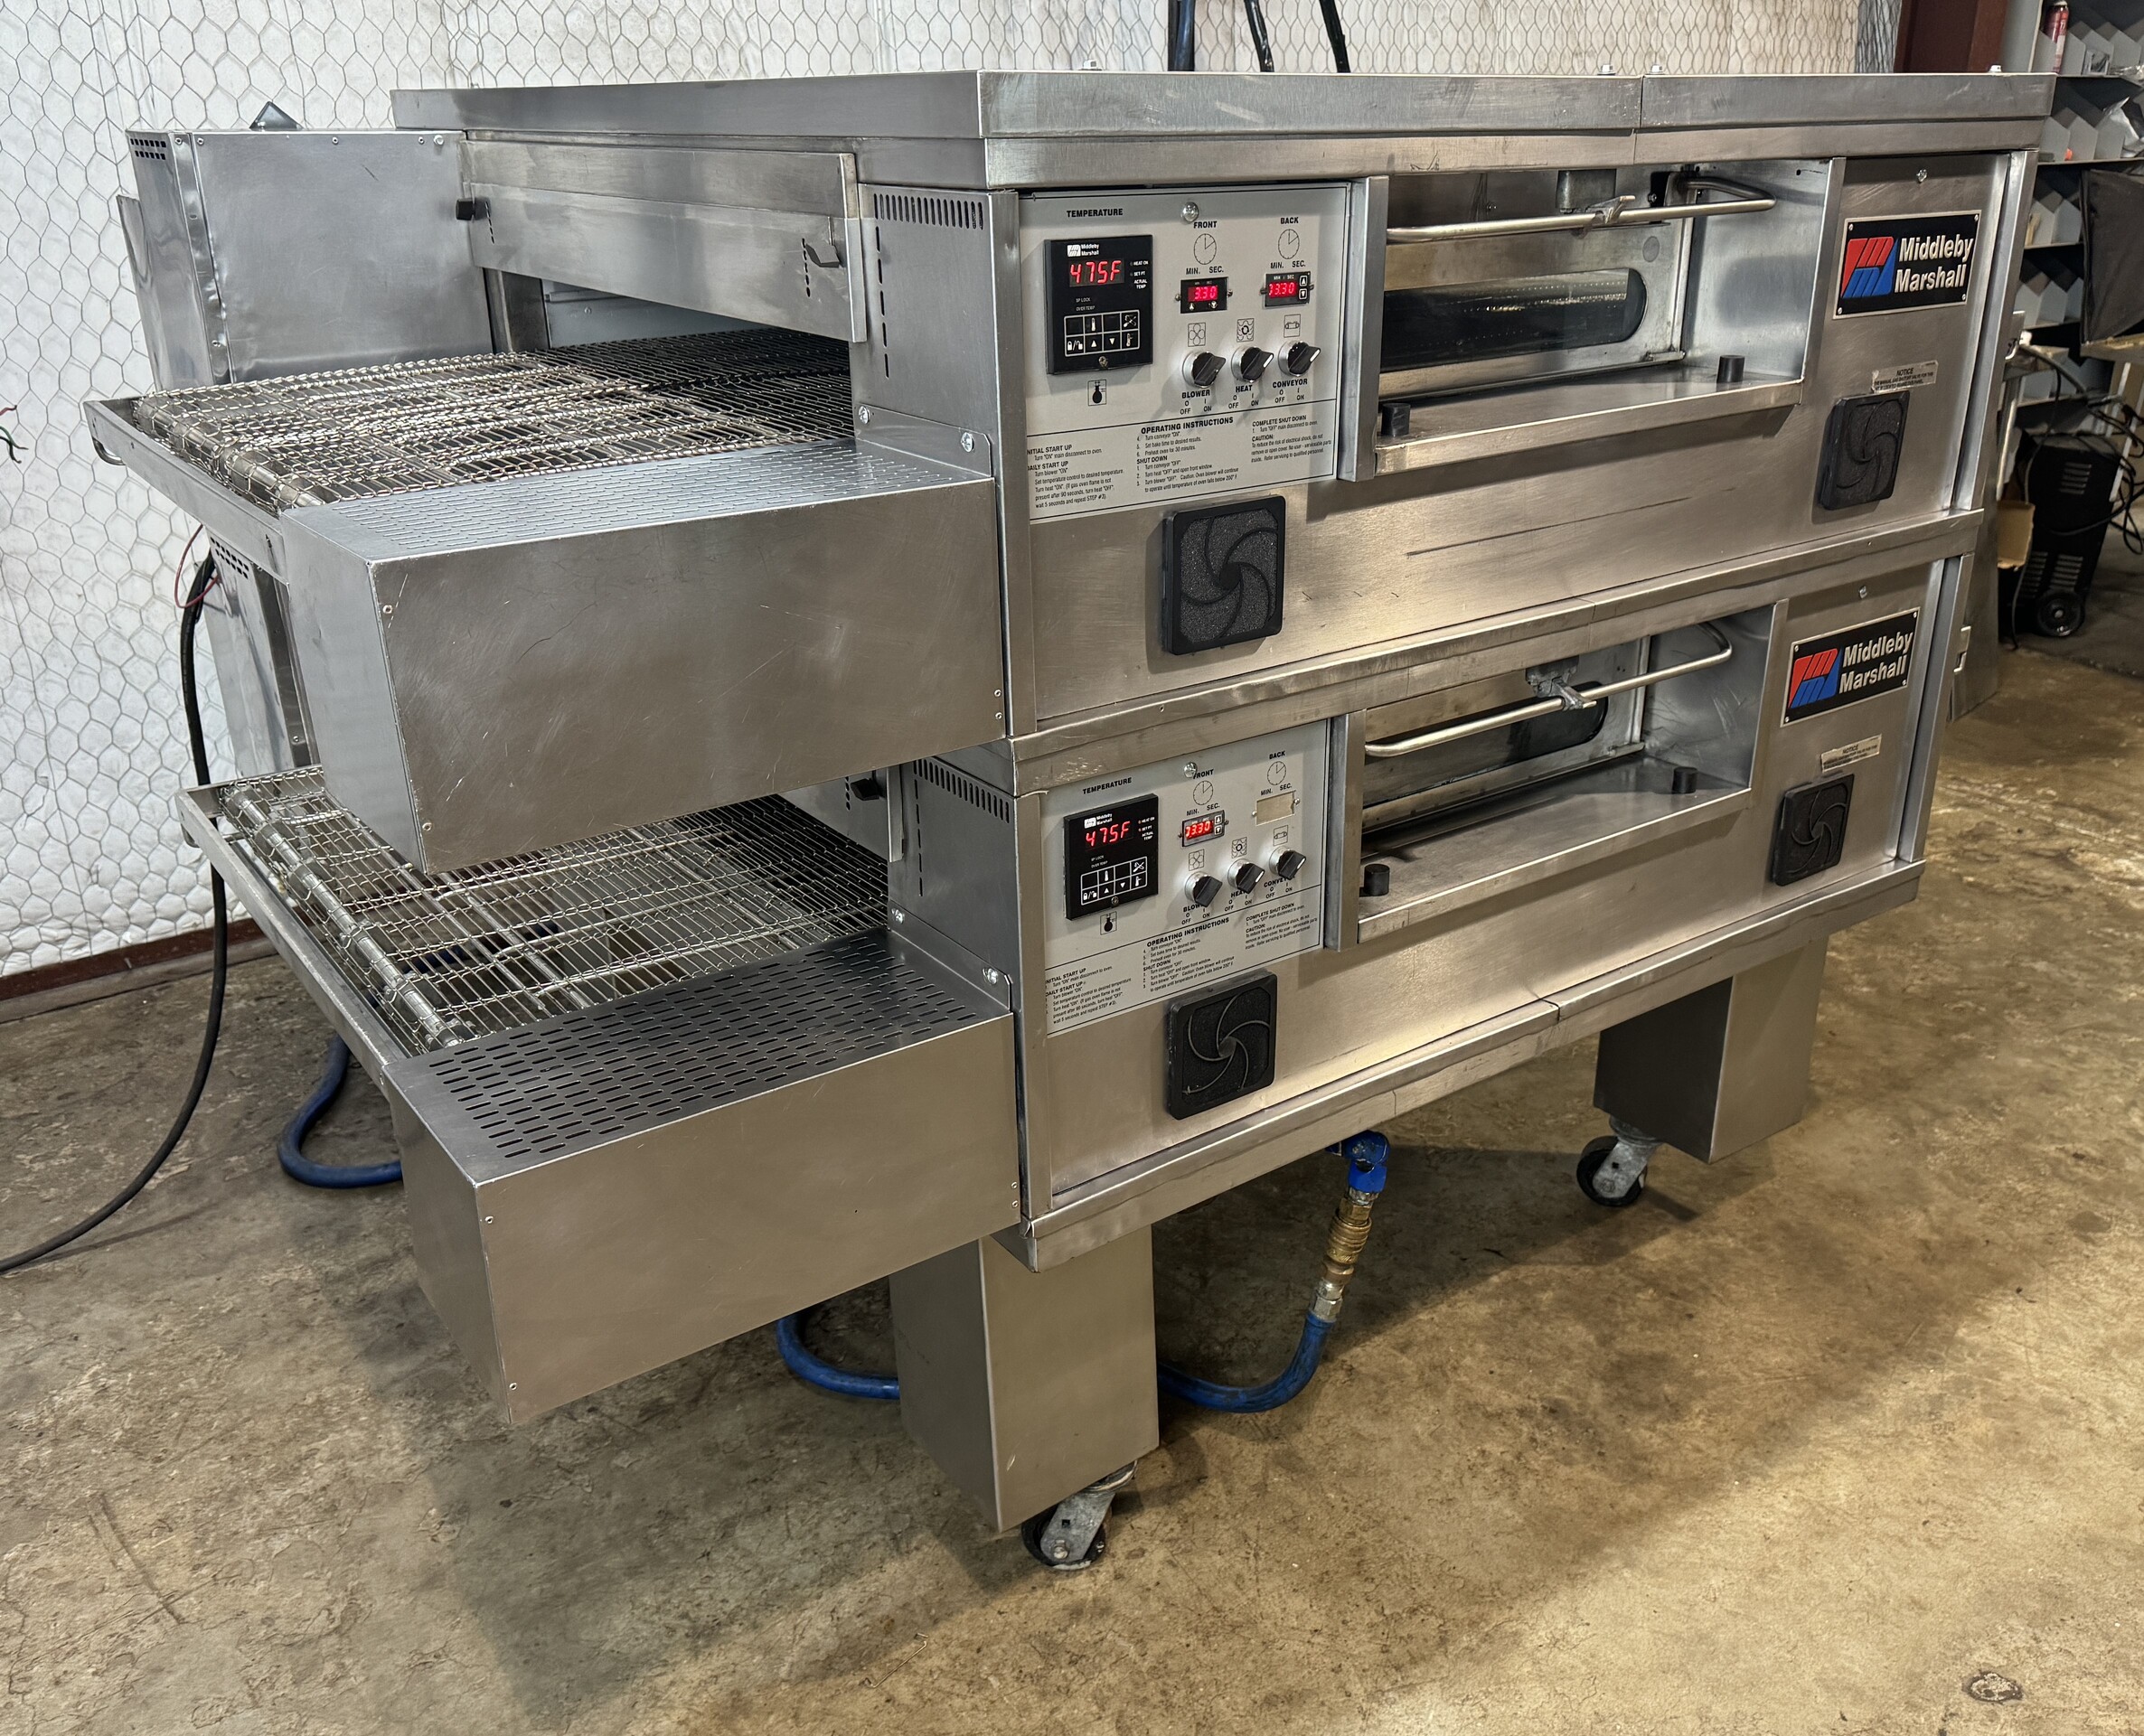 MIDDLEBY MARSHALL PS555 PIZZA CONVEYOR OVEN